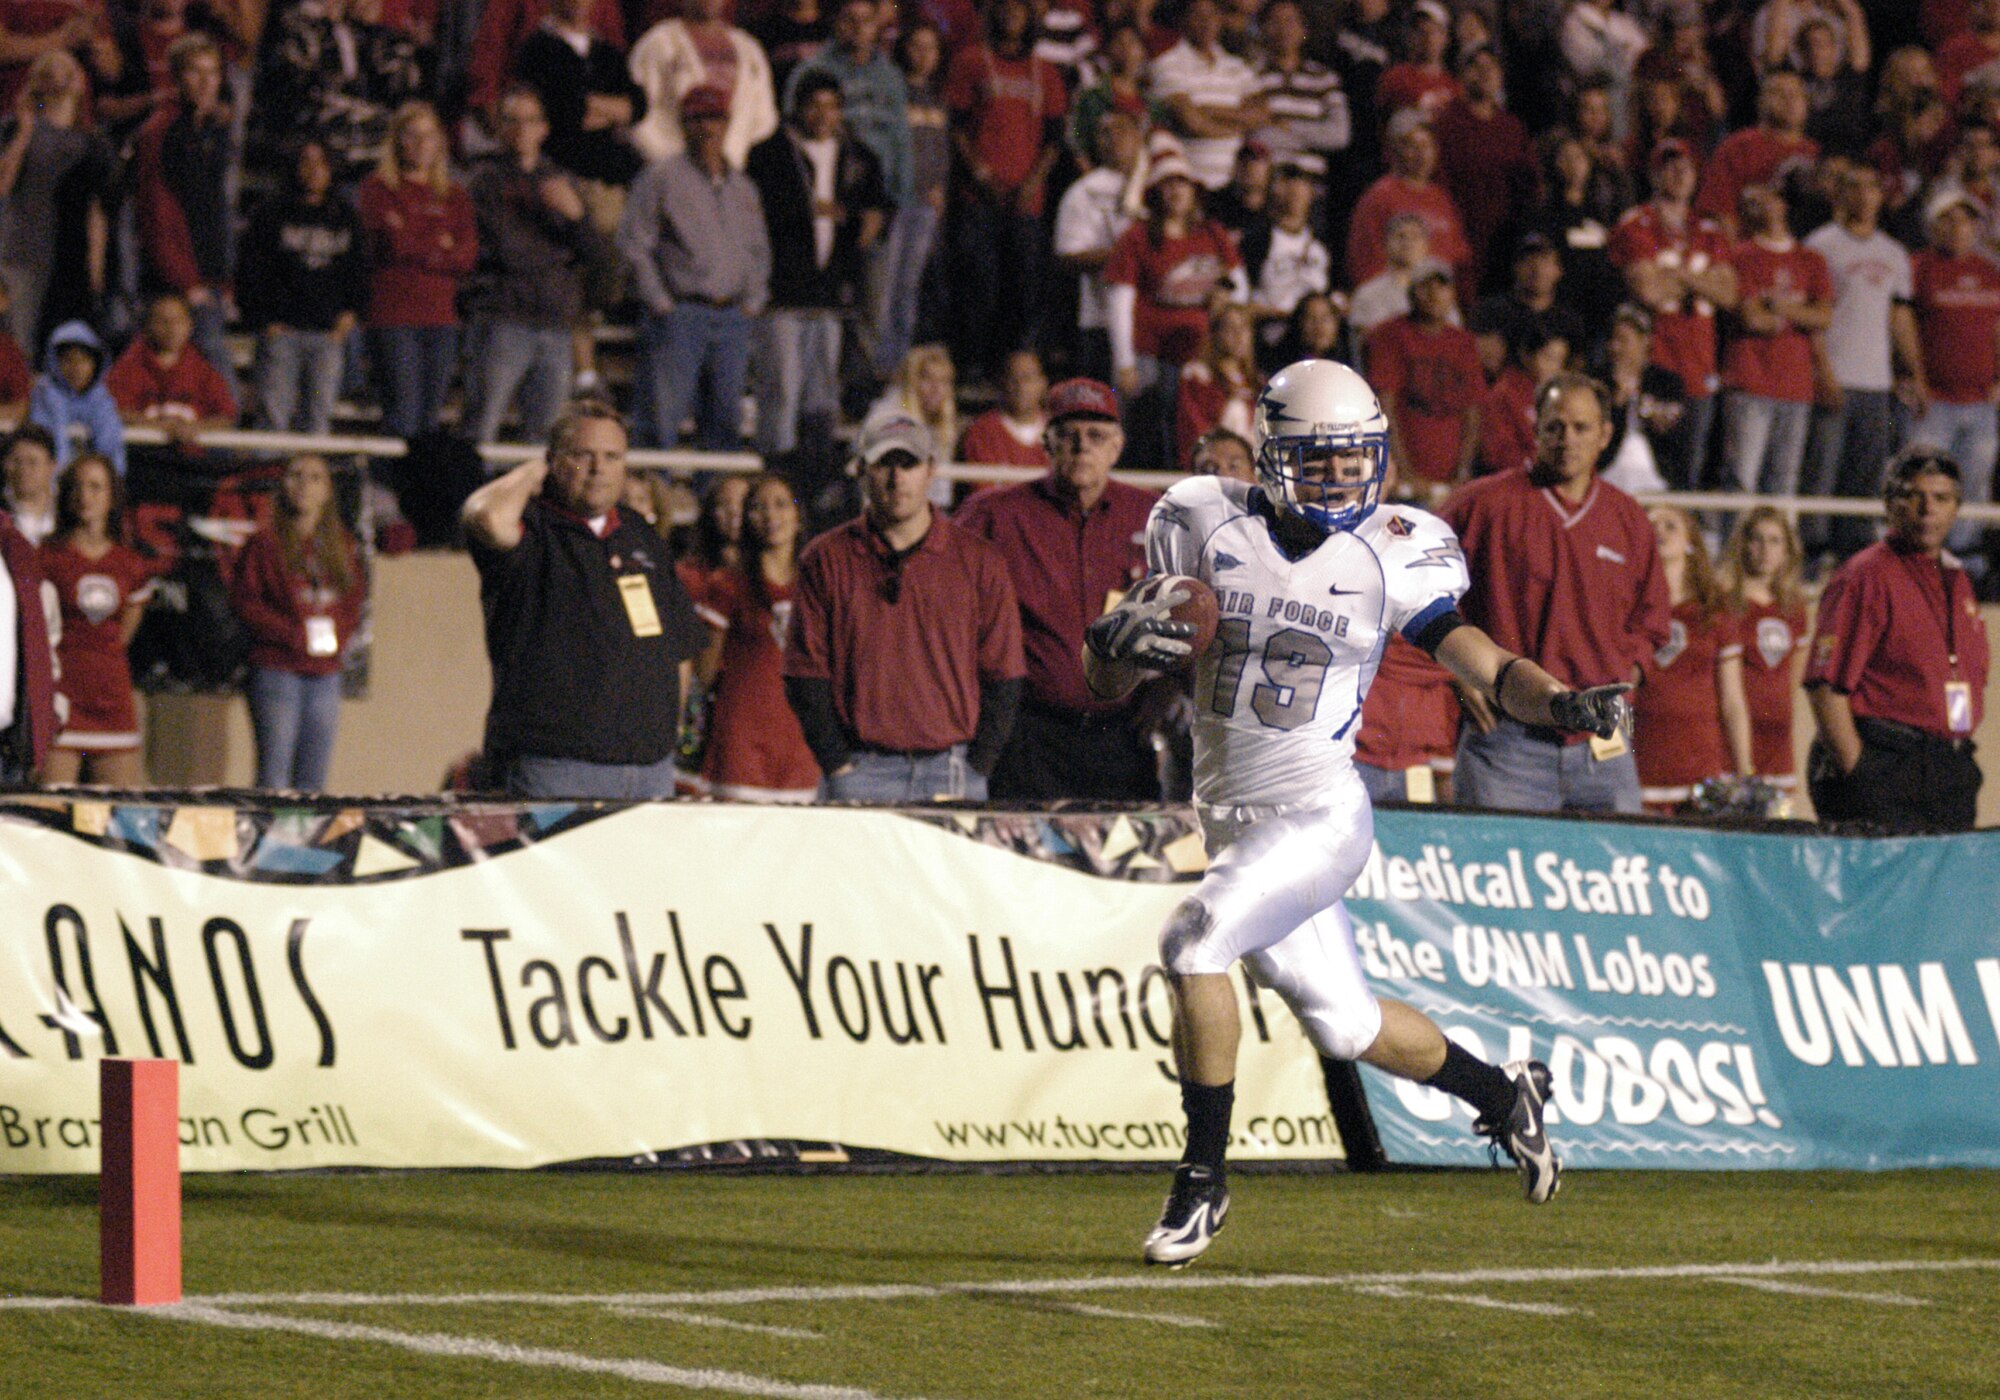 Falcon wide receiver Ty Paffett sprints for a 21-yard end around touchdown in the second quarter of Air Force's 34-31 loss to New Mexico Oct. 25 at University Stadium in Albuquerque. The Falcons ran 49 times for 212 yards on the ground. (U.S. Air Force photo/John Van Winkle) 